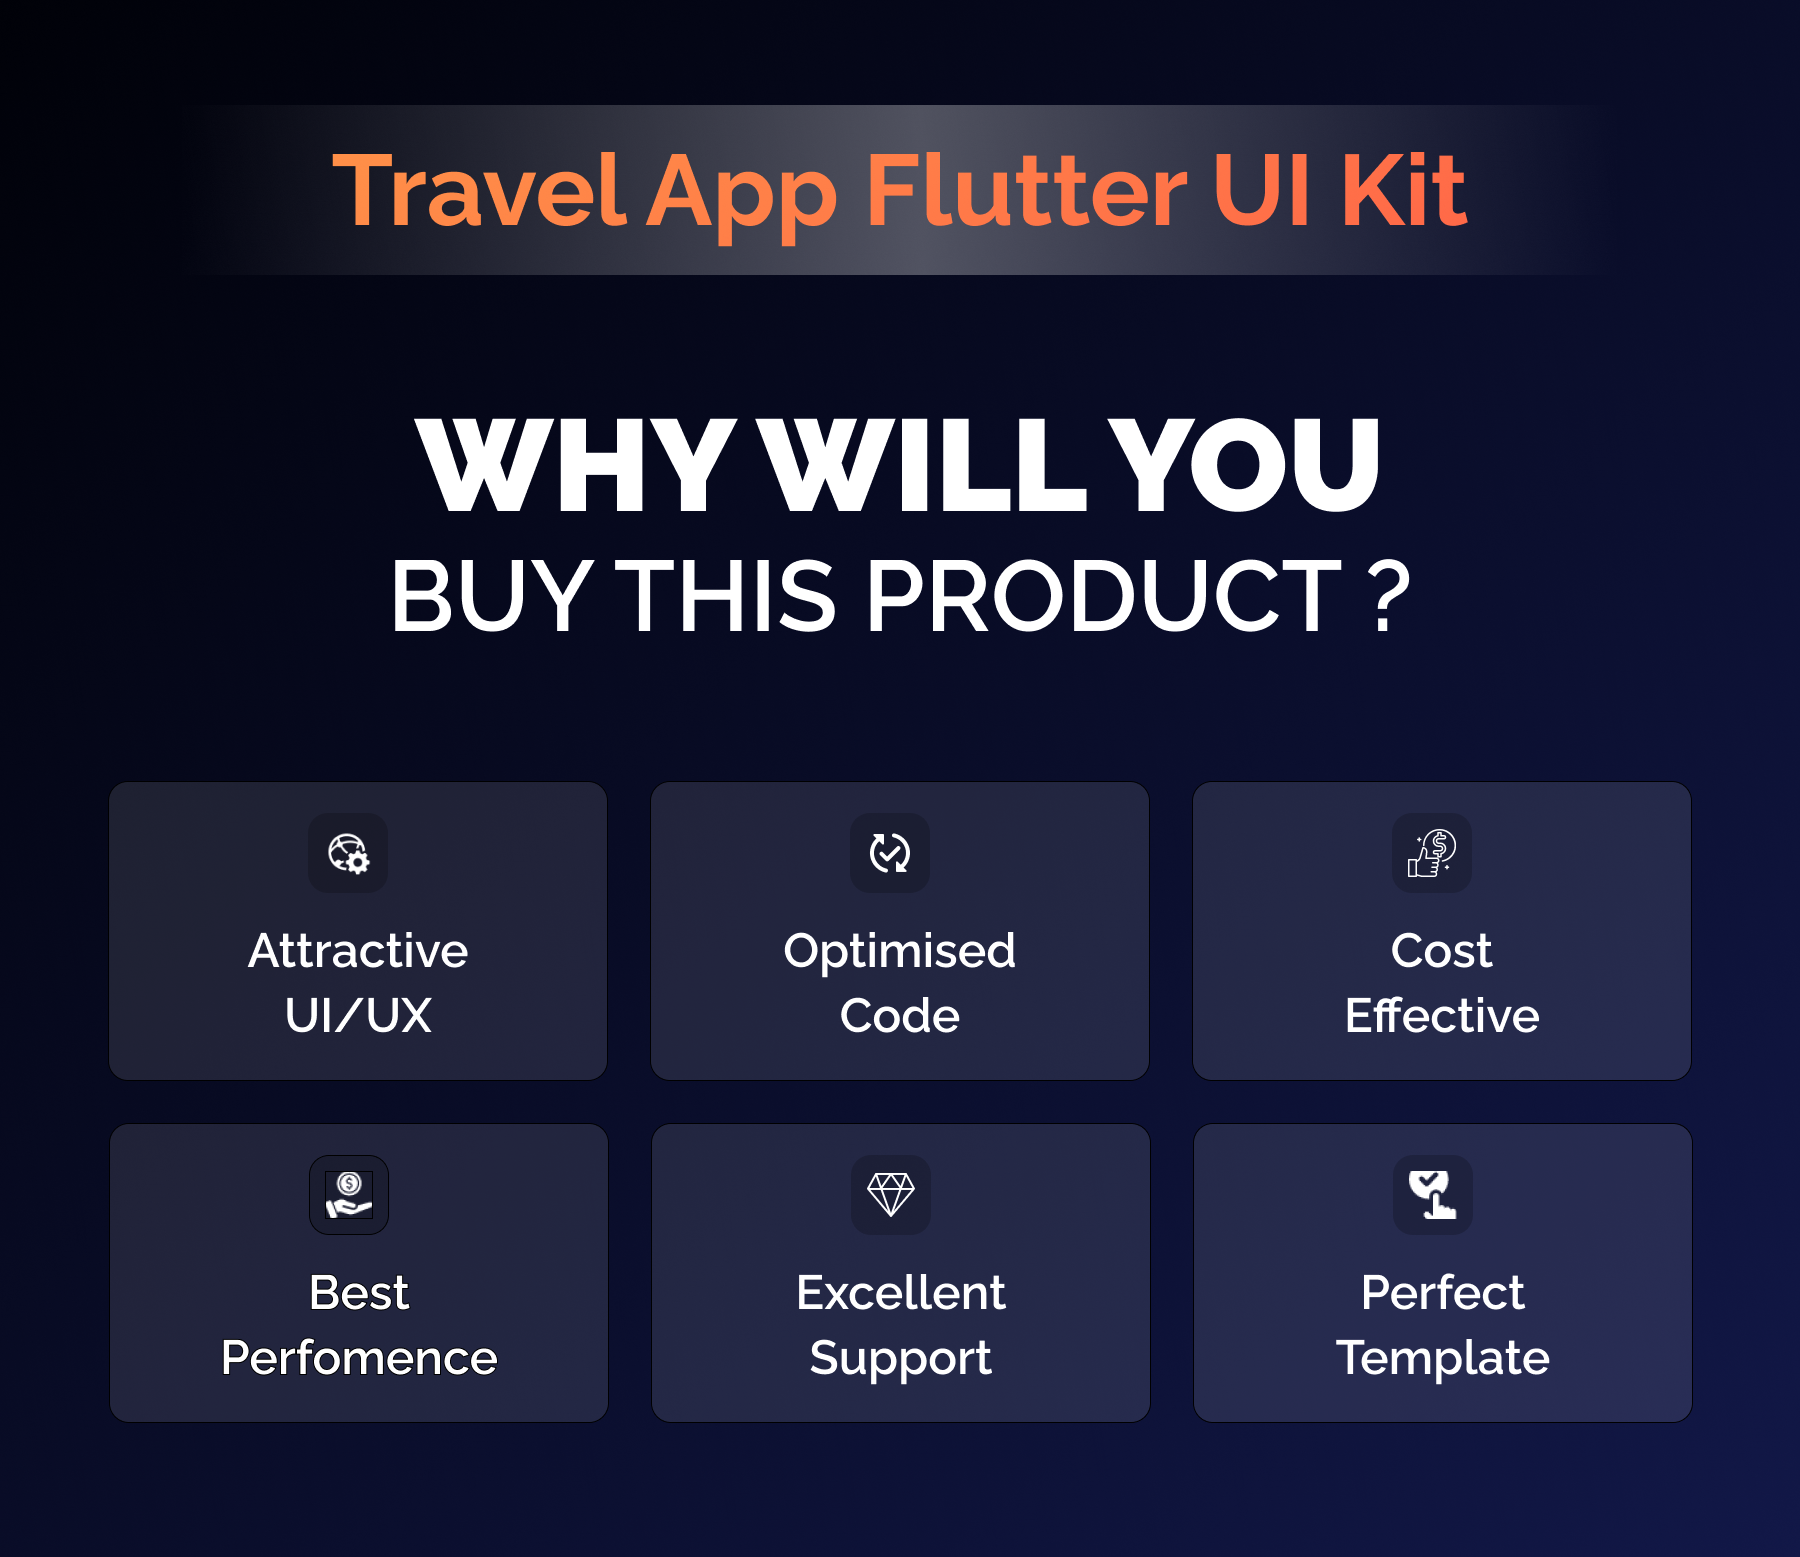 Travel World -Tour & Travel | Travel Planner | Holiday Booking | Flutter iOS/Android App Template - 3